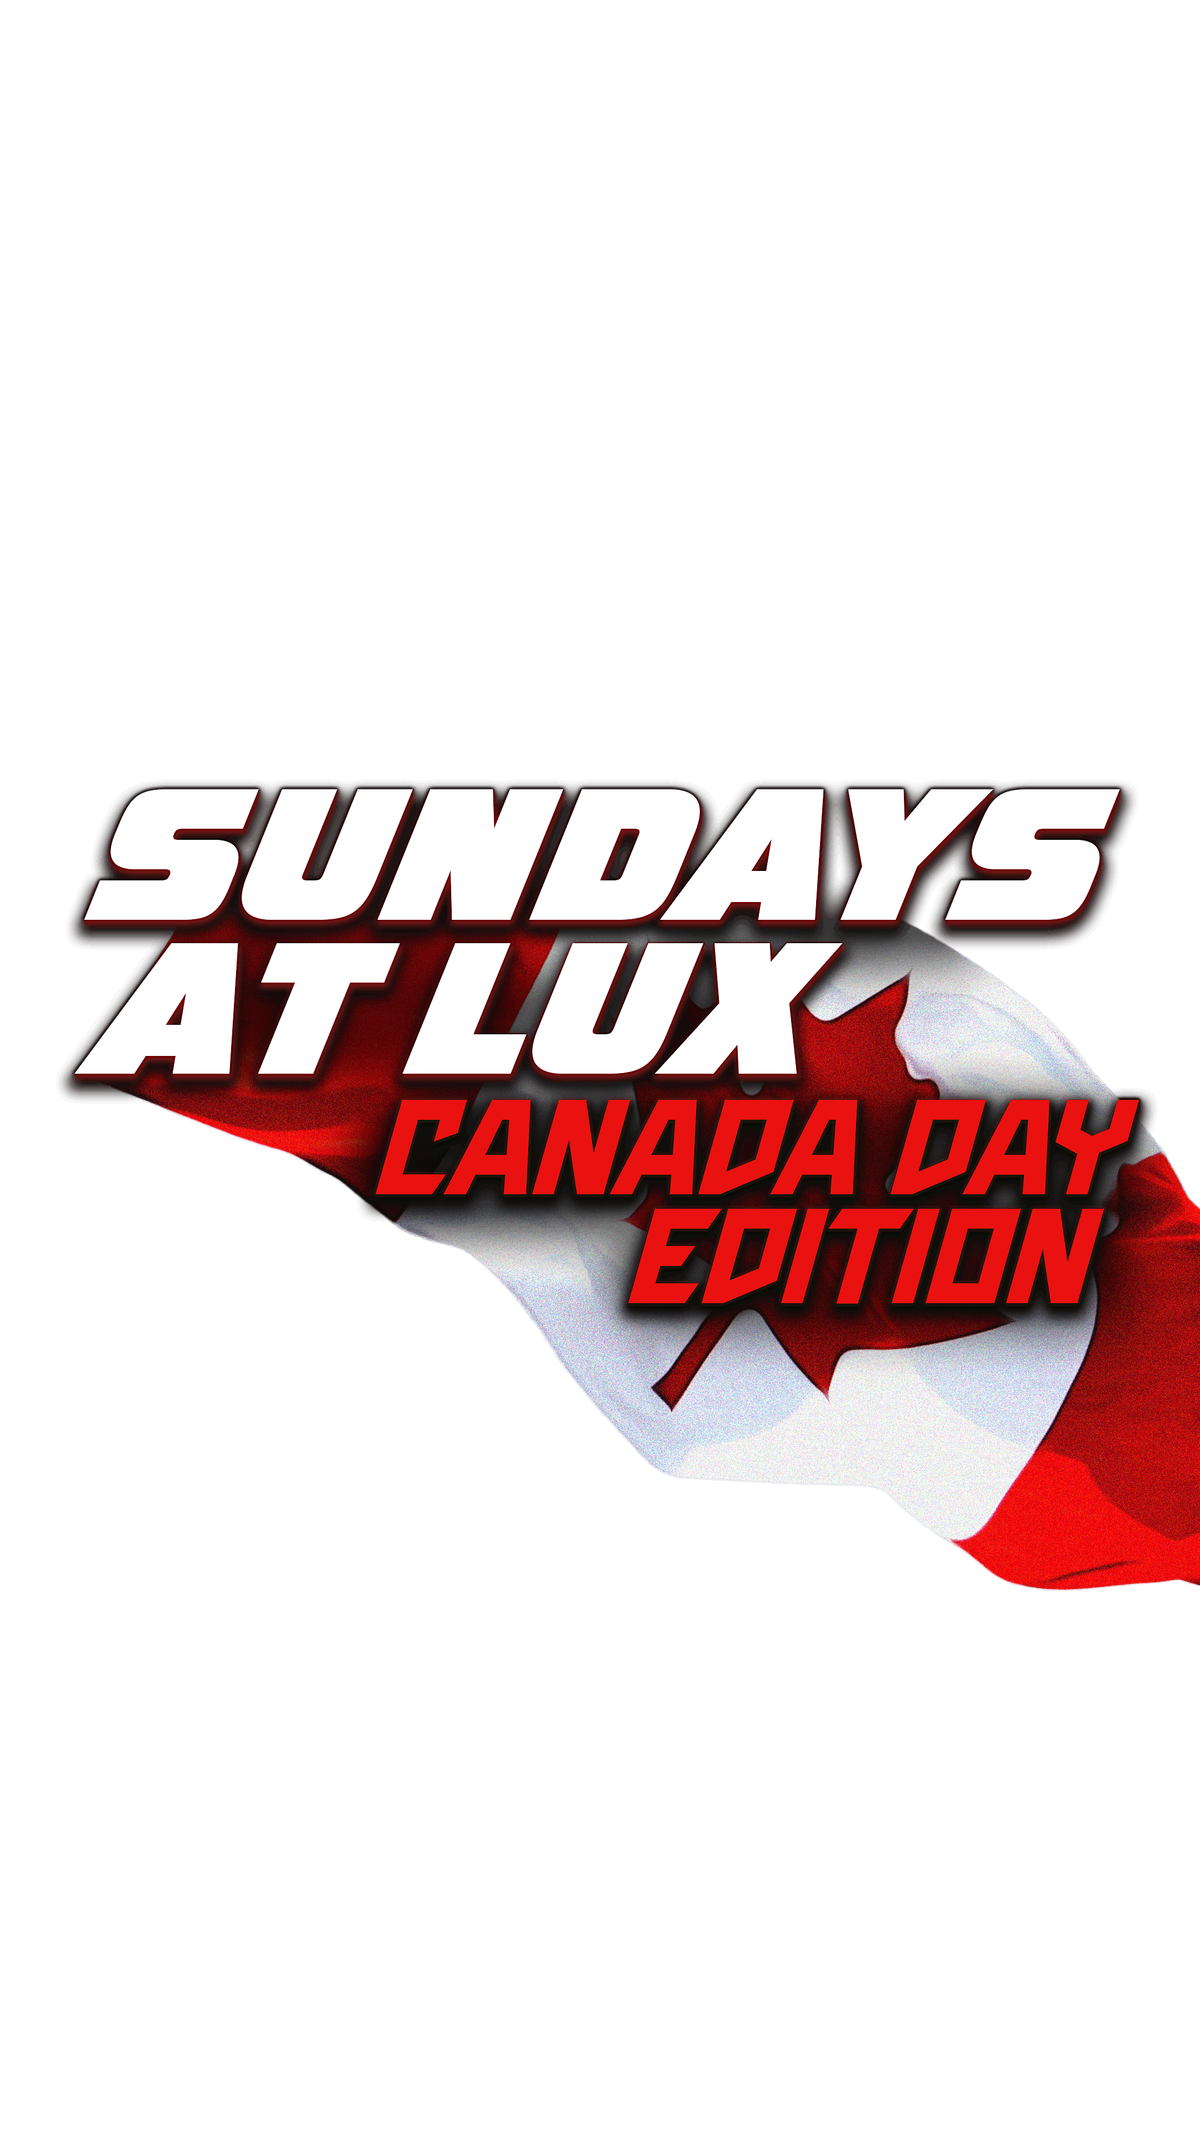 This Sunday Canada Day Ladies Free inside Club Lux